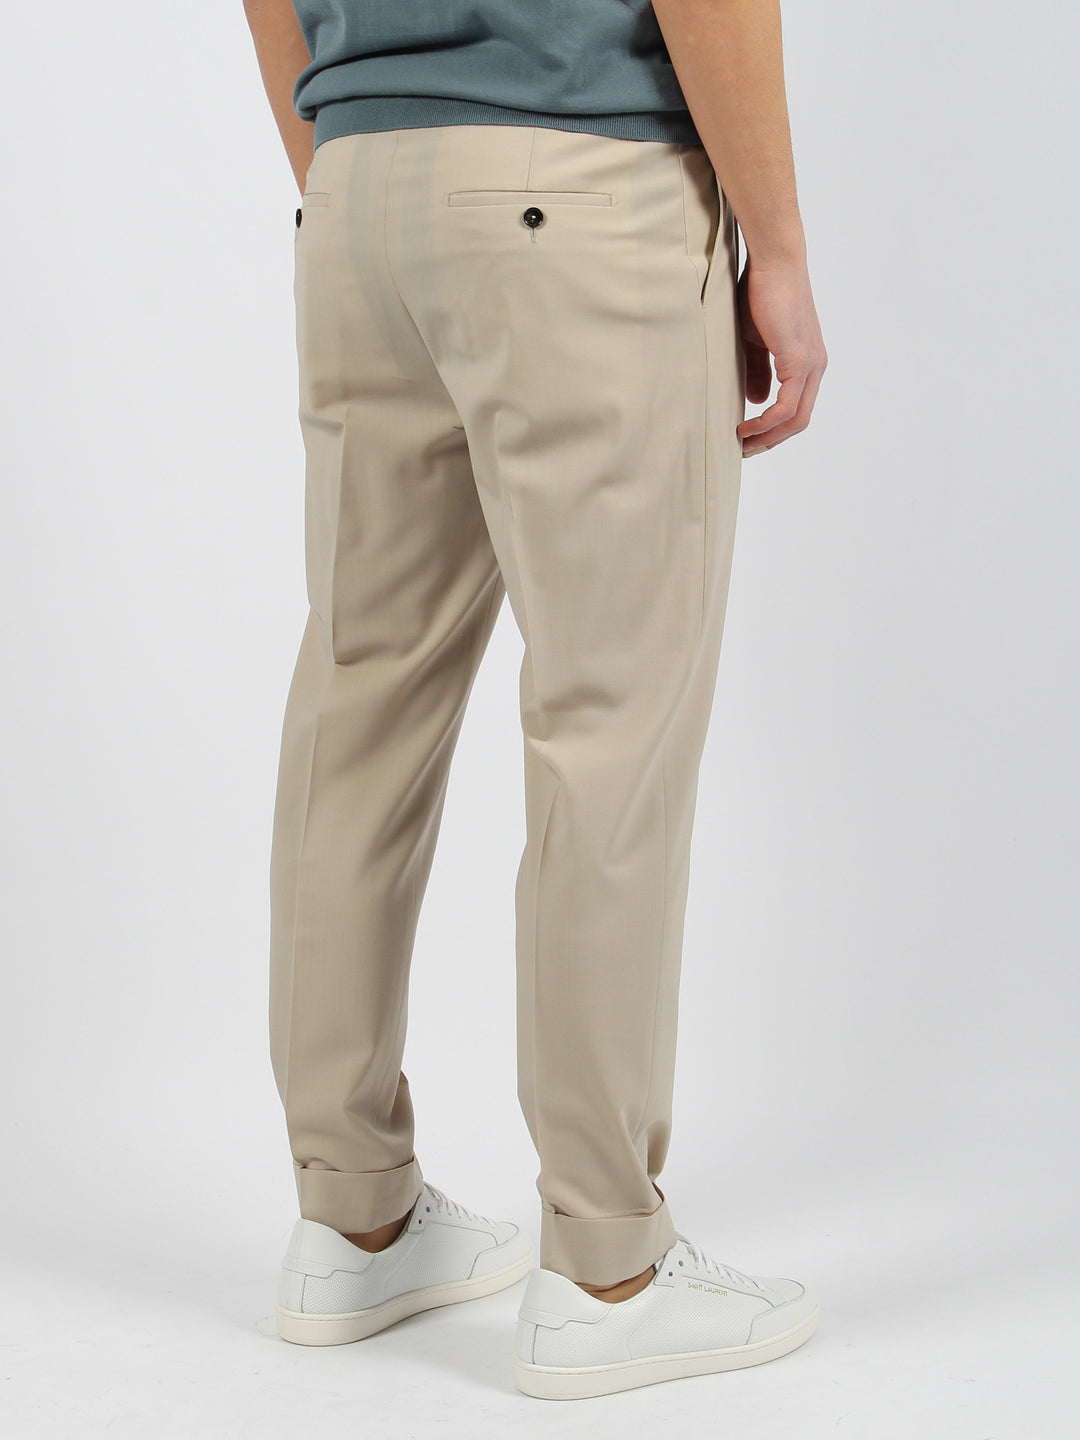 Robby pleated pants